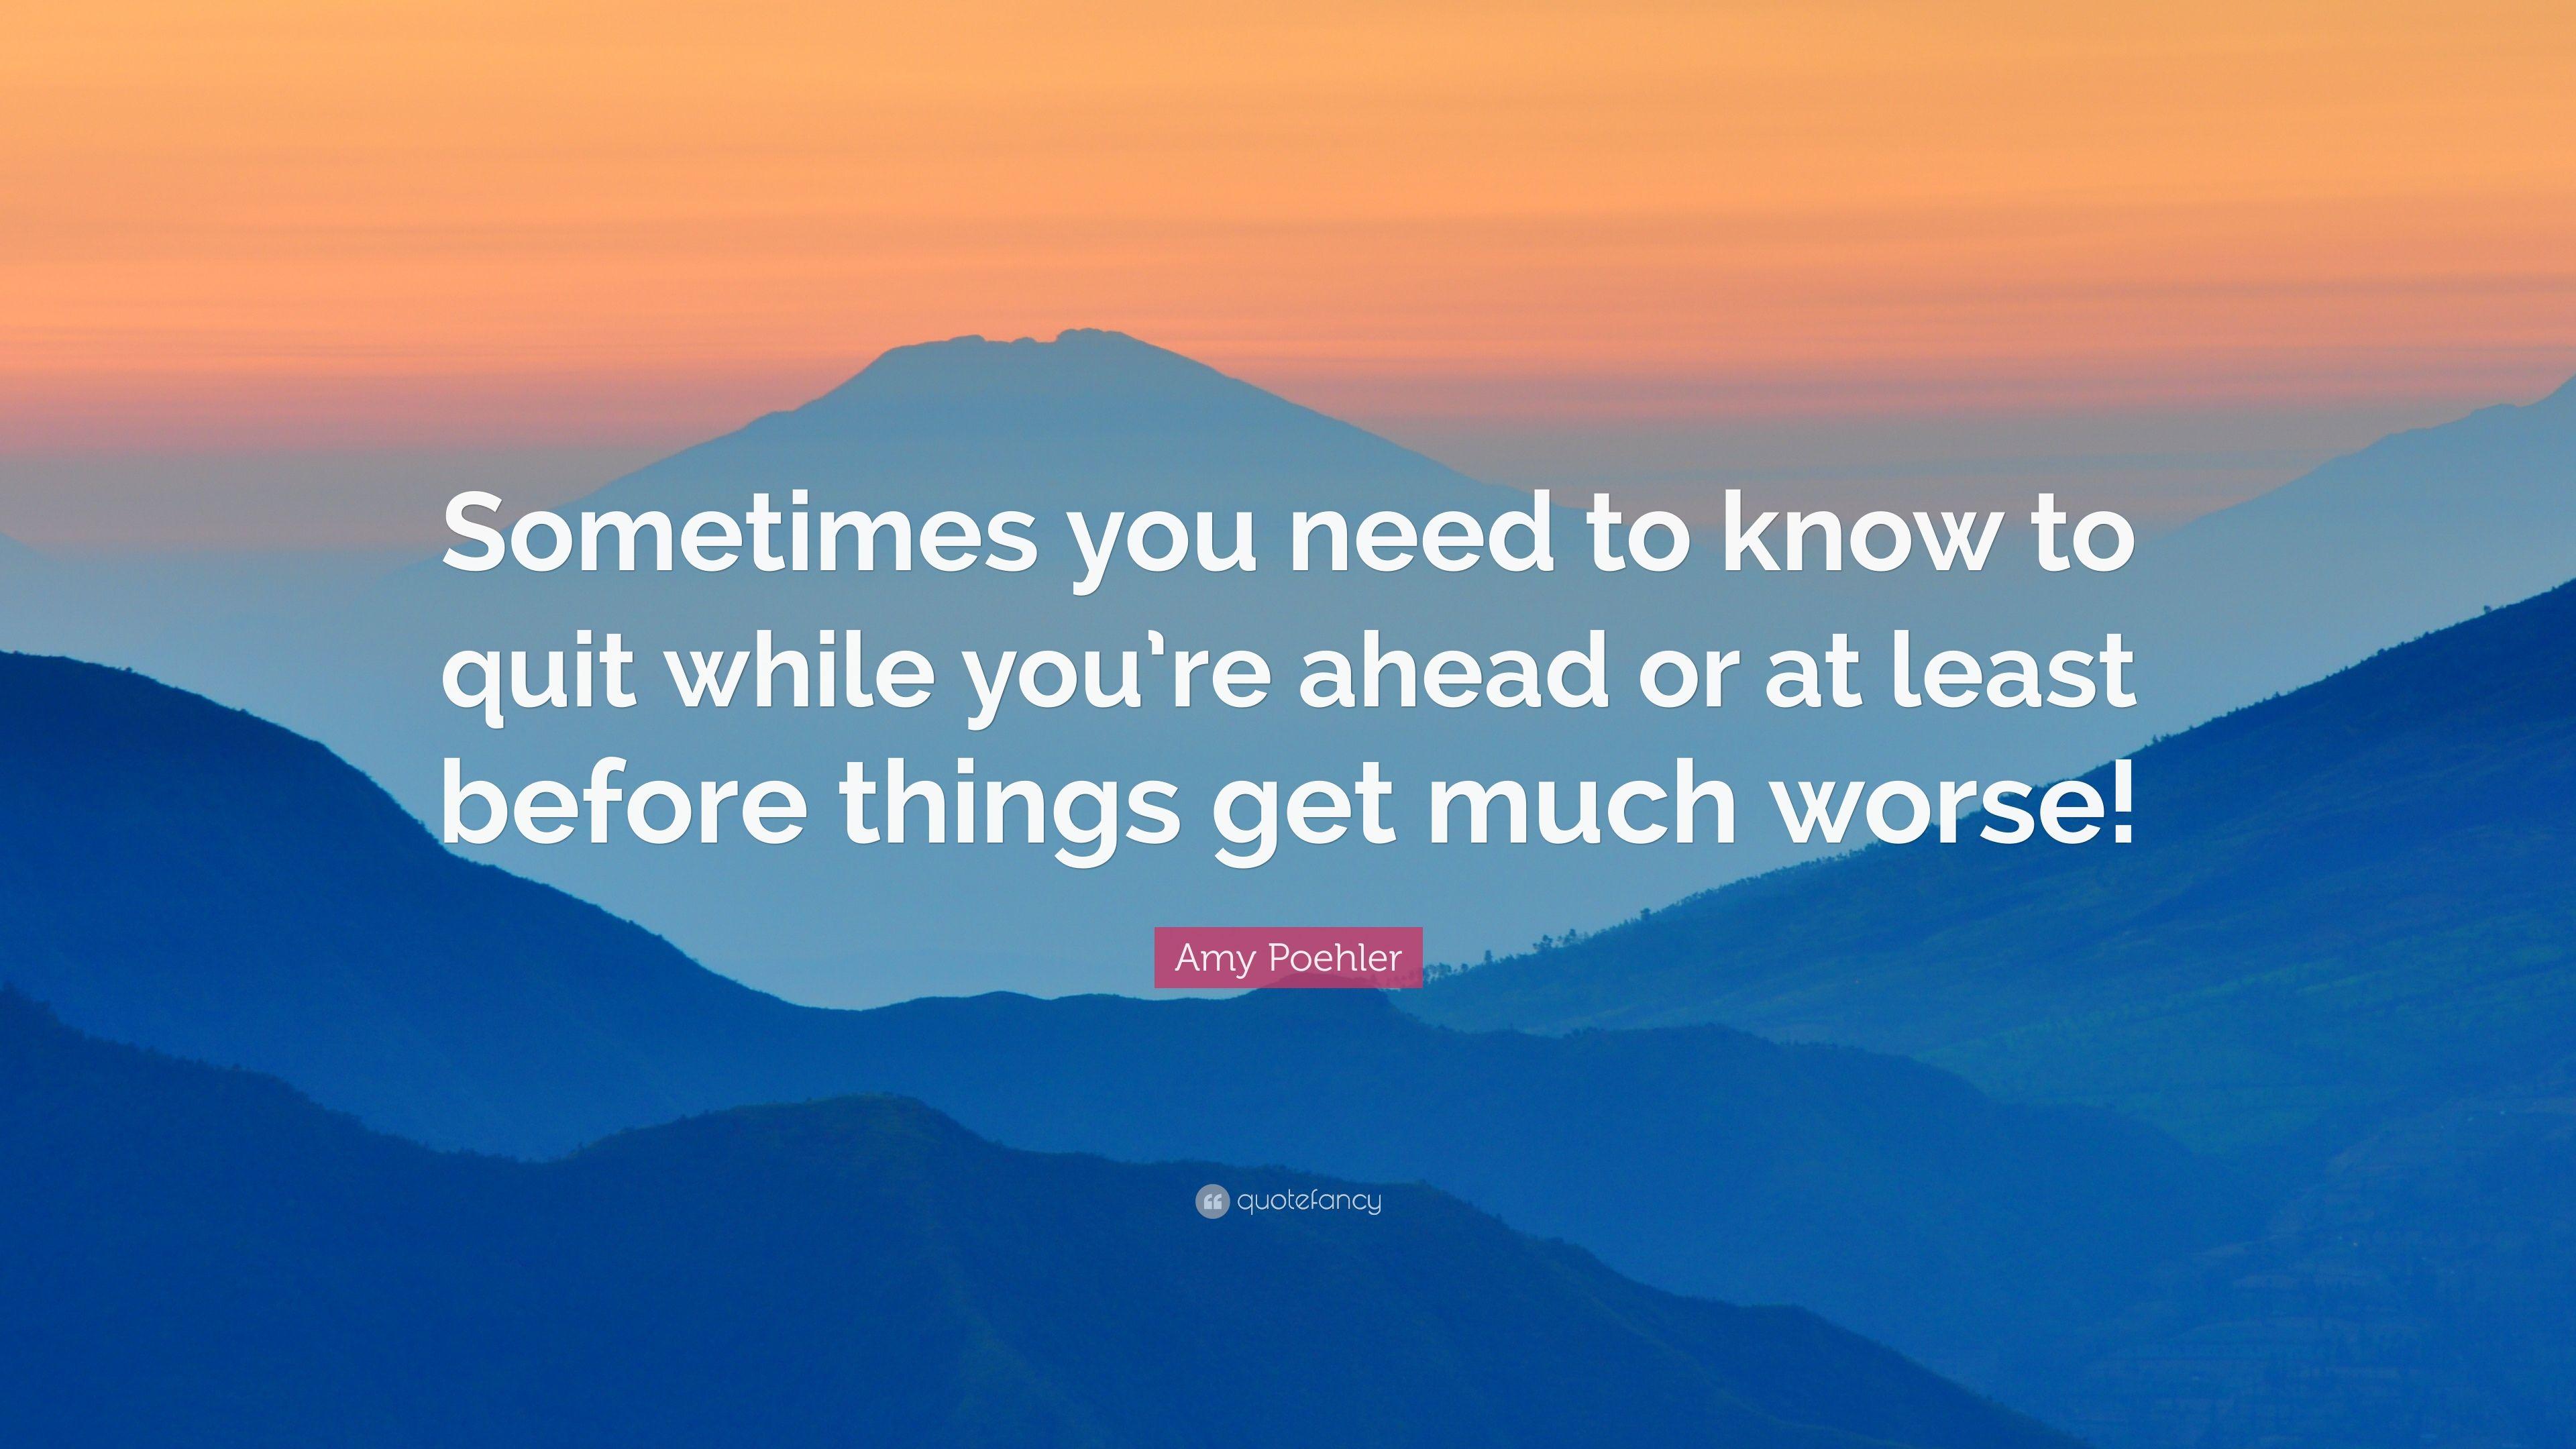 Amy Poehler Quote: “Sometimes you need to know to quit while you're